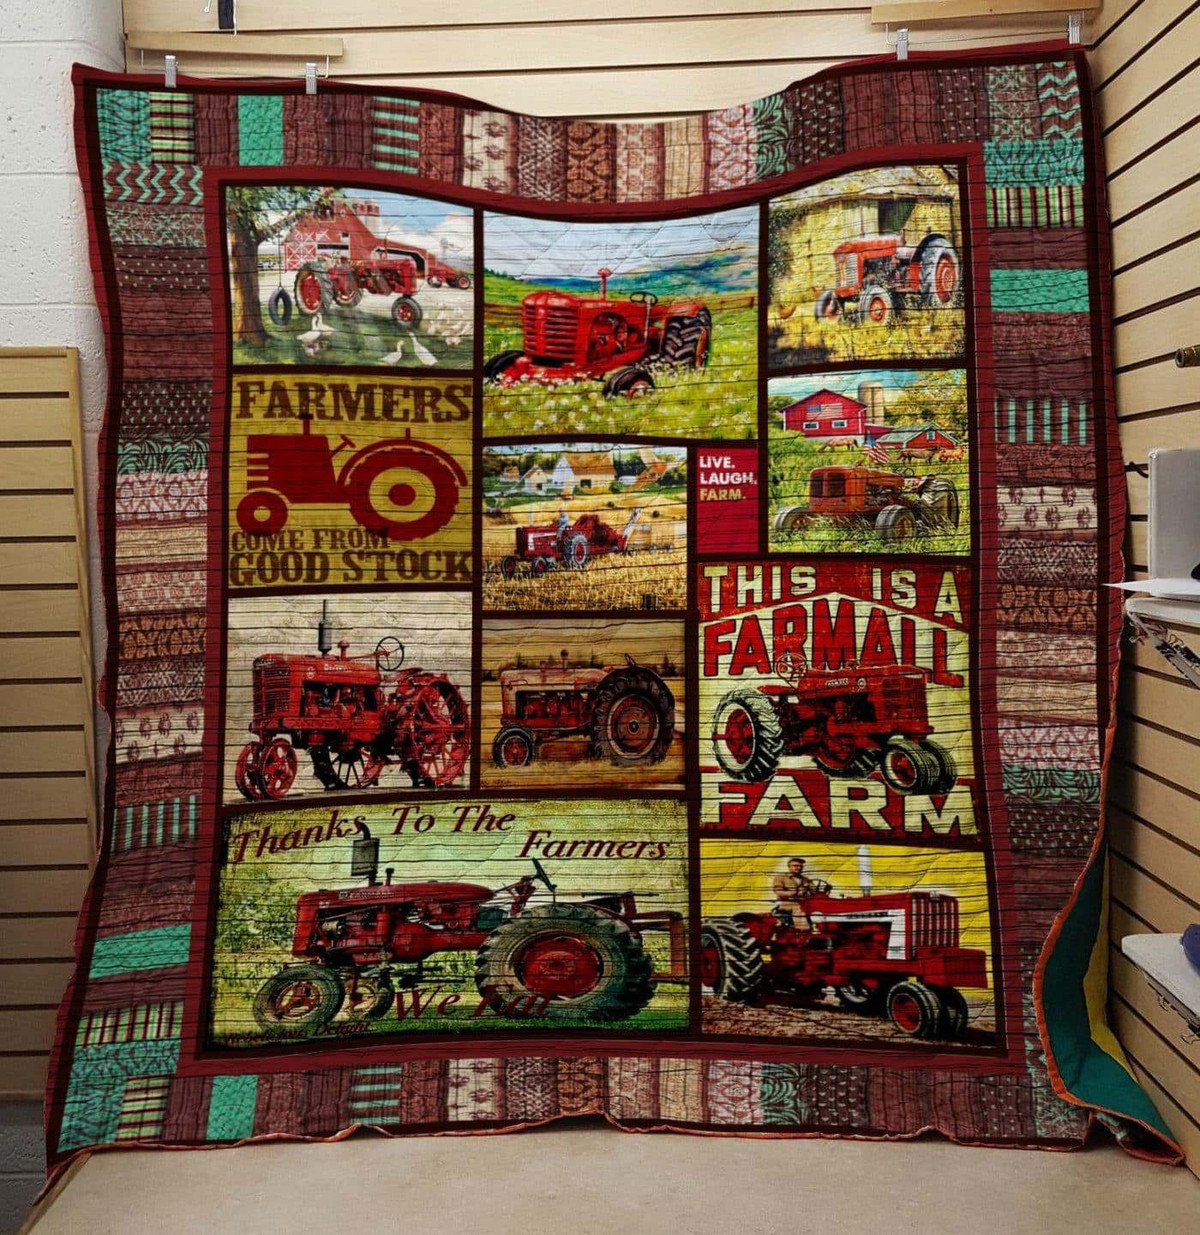 farm-tractor-farmers-come-from-good-stock-awesome-myt766-quilt